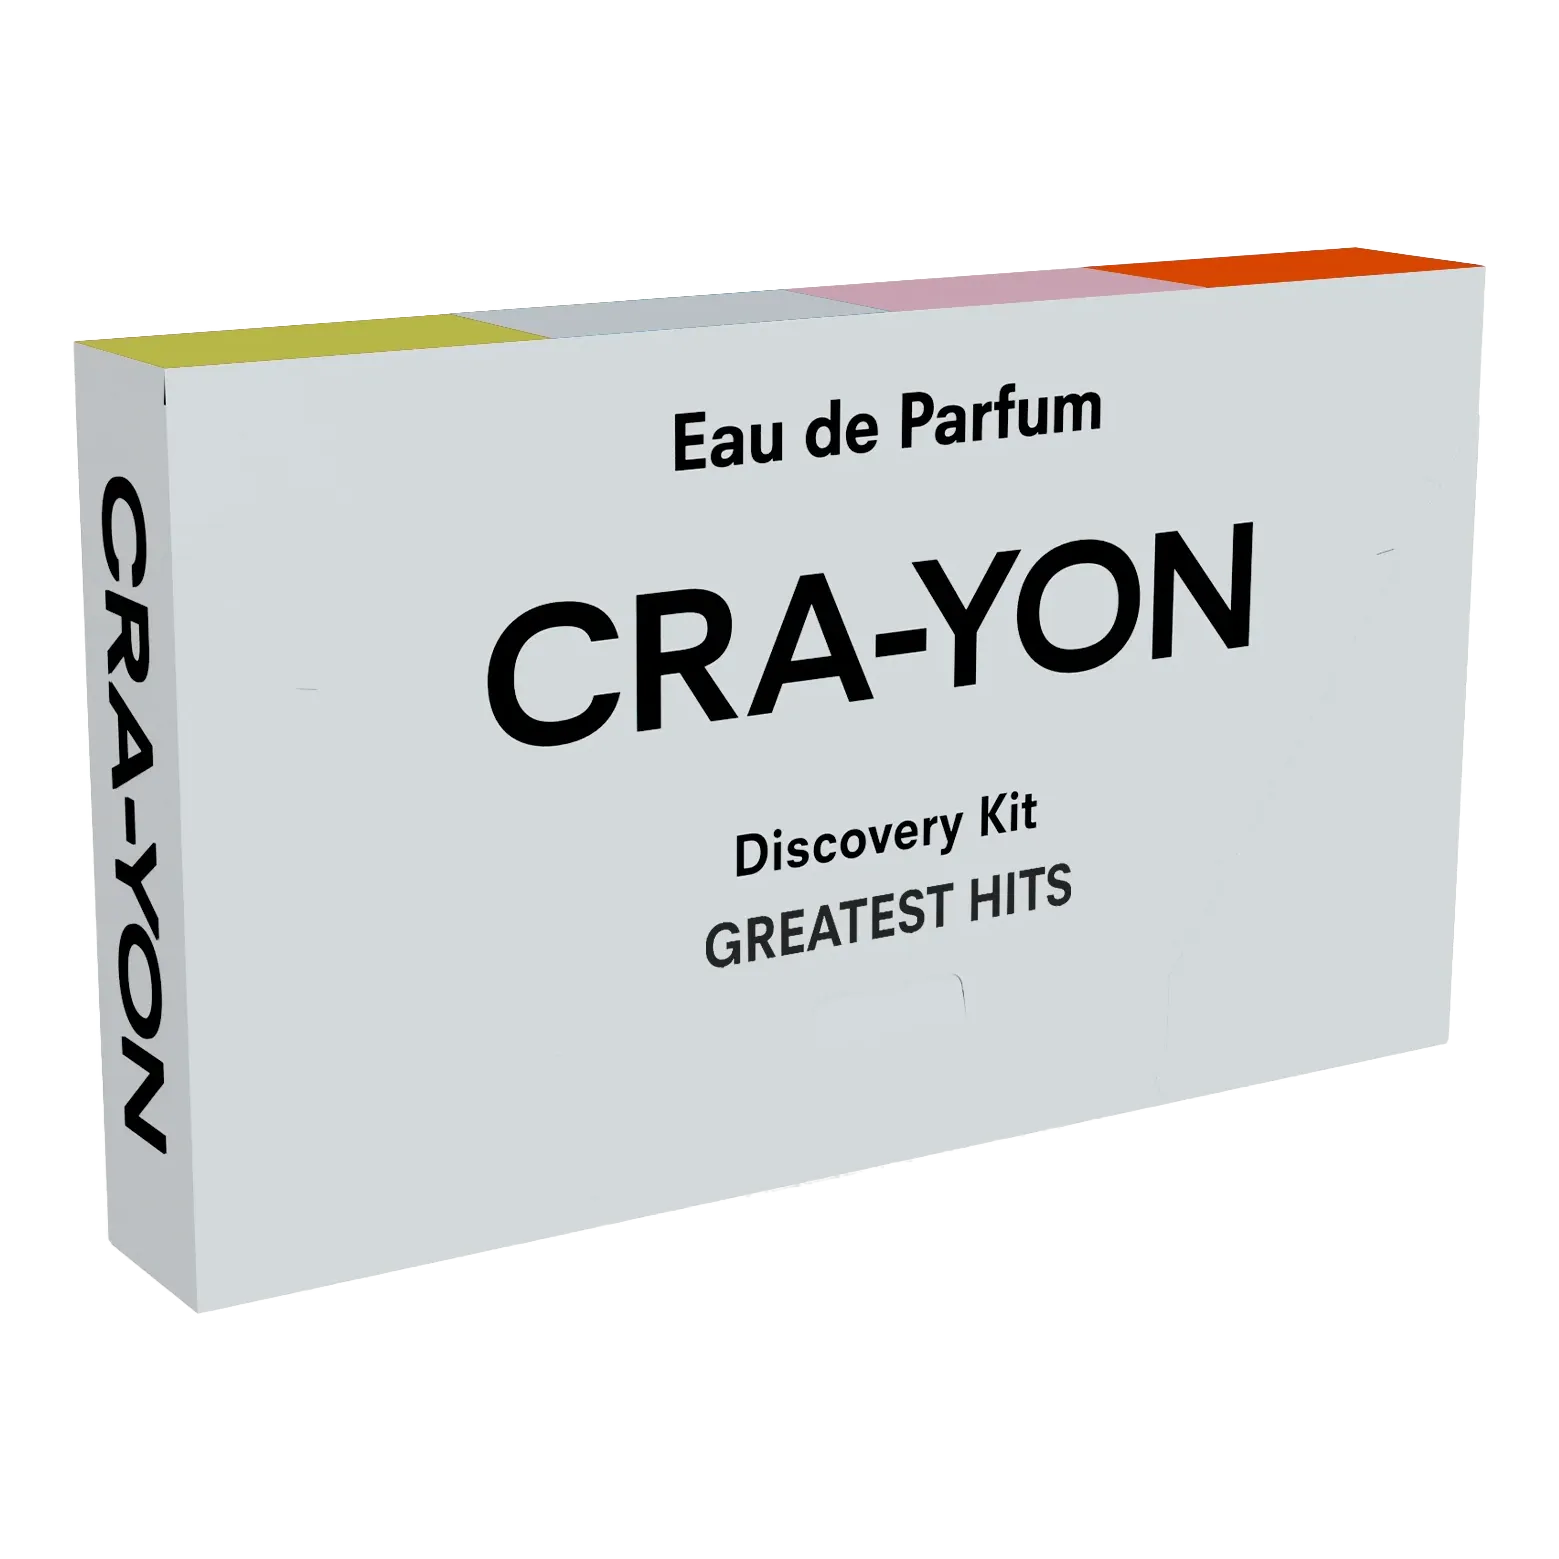 CRA-YON Discovery pack duftprøver - Greatest Hits 